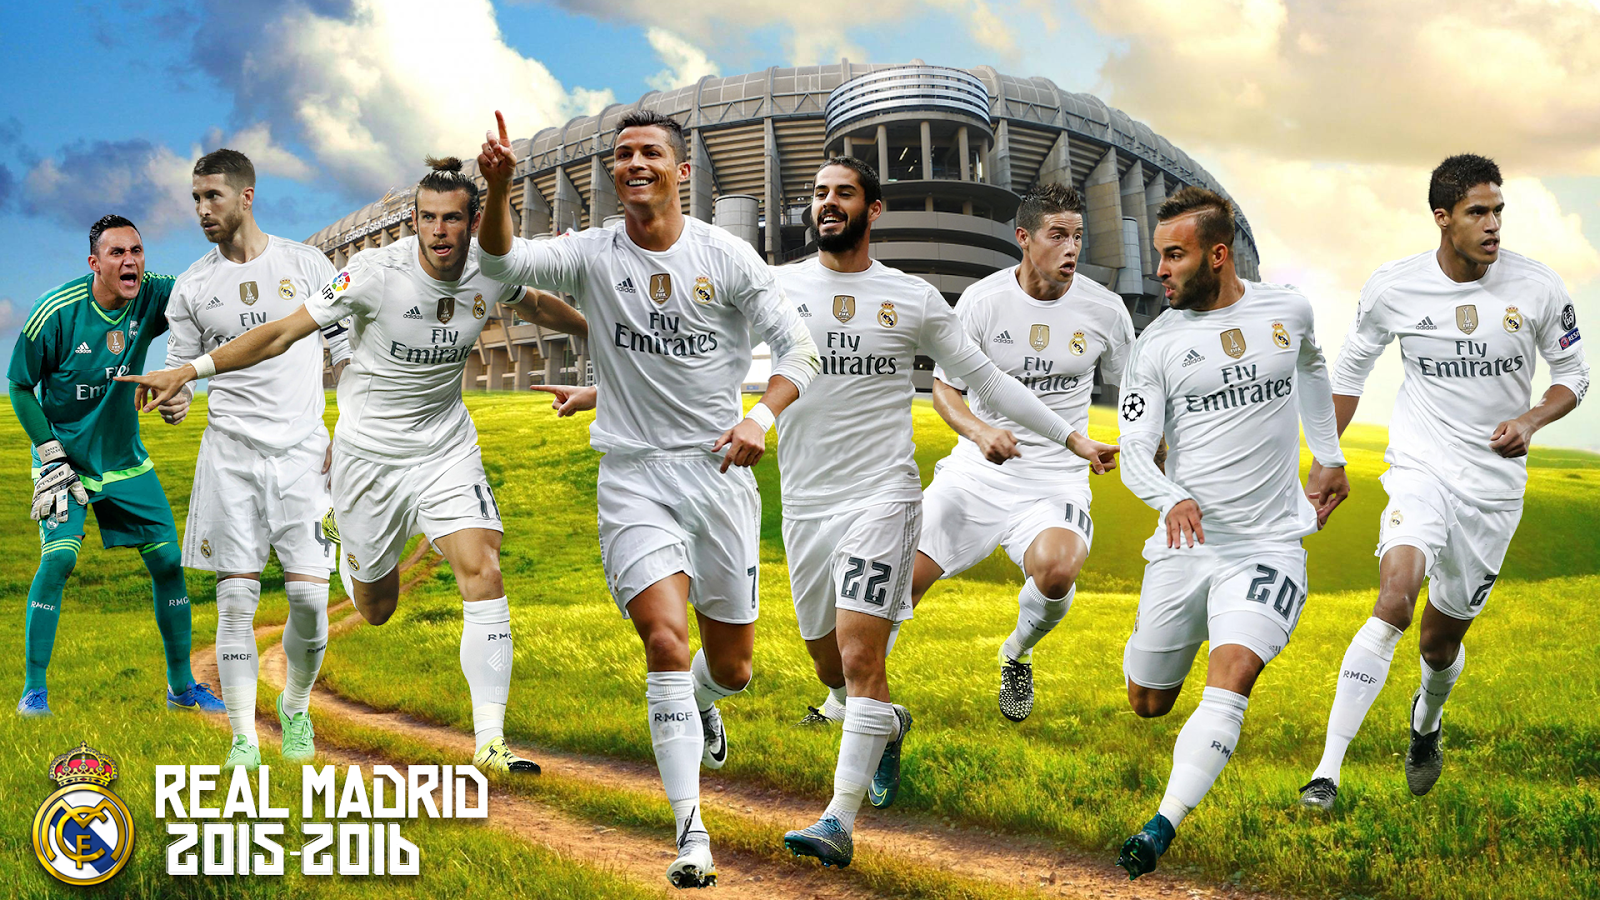 New Real Madrid Wallpapers 2015 16 Part 2 Hd Football Wallpapers